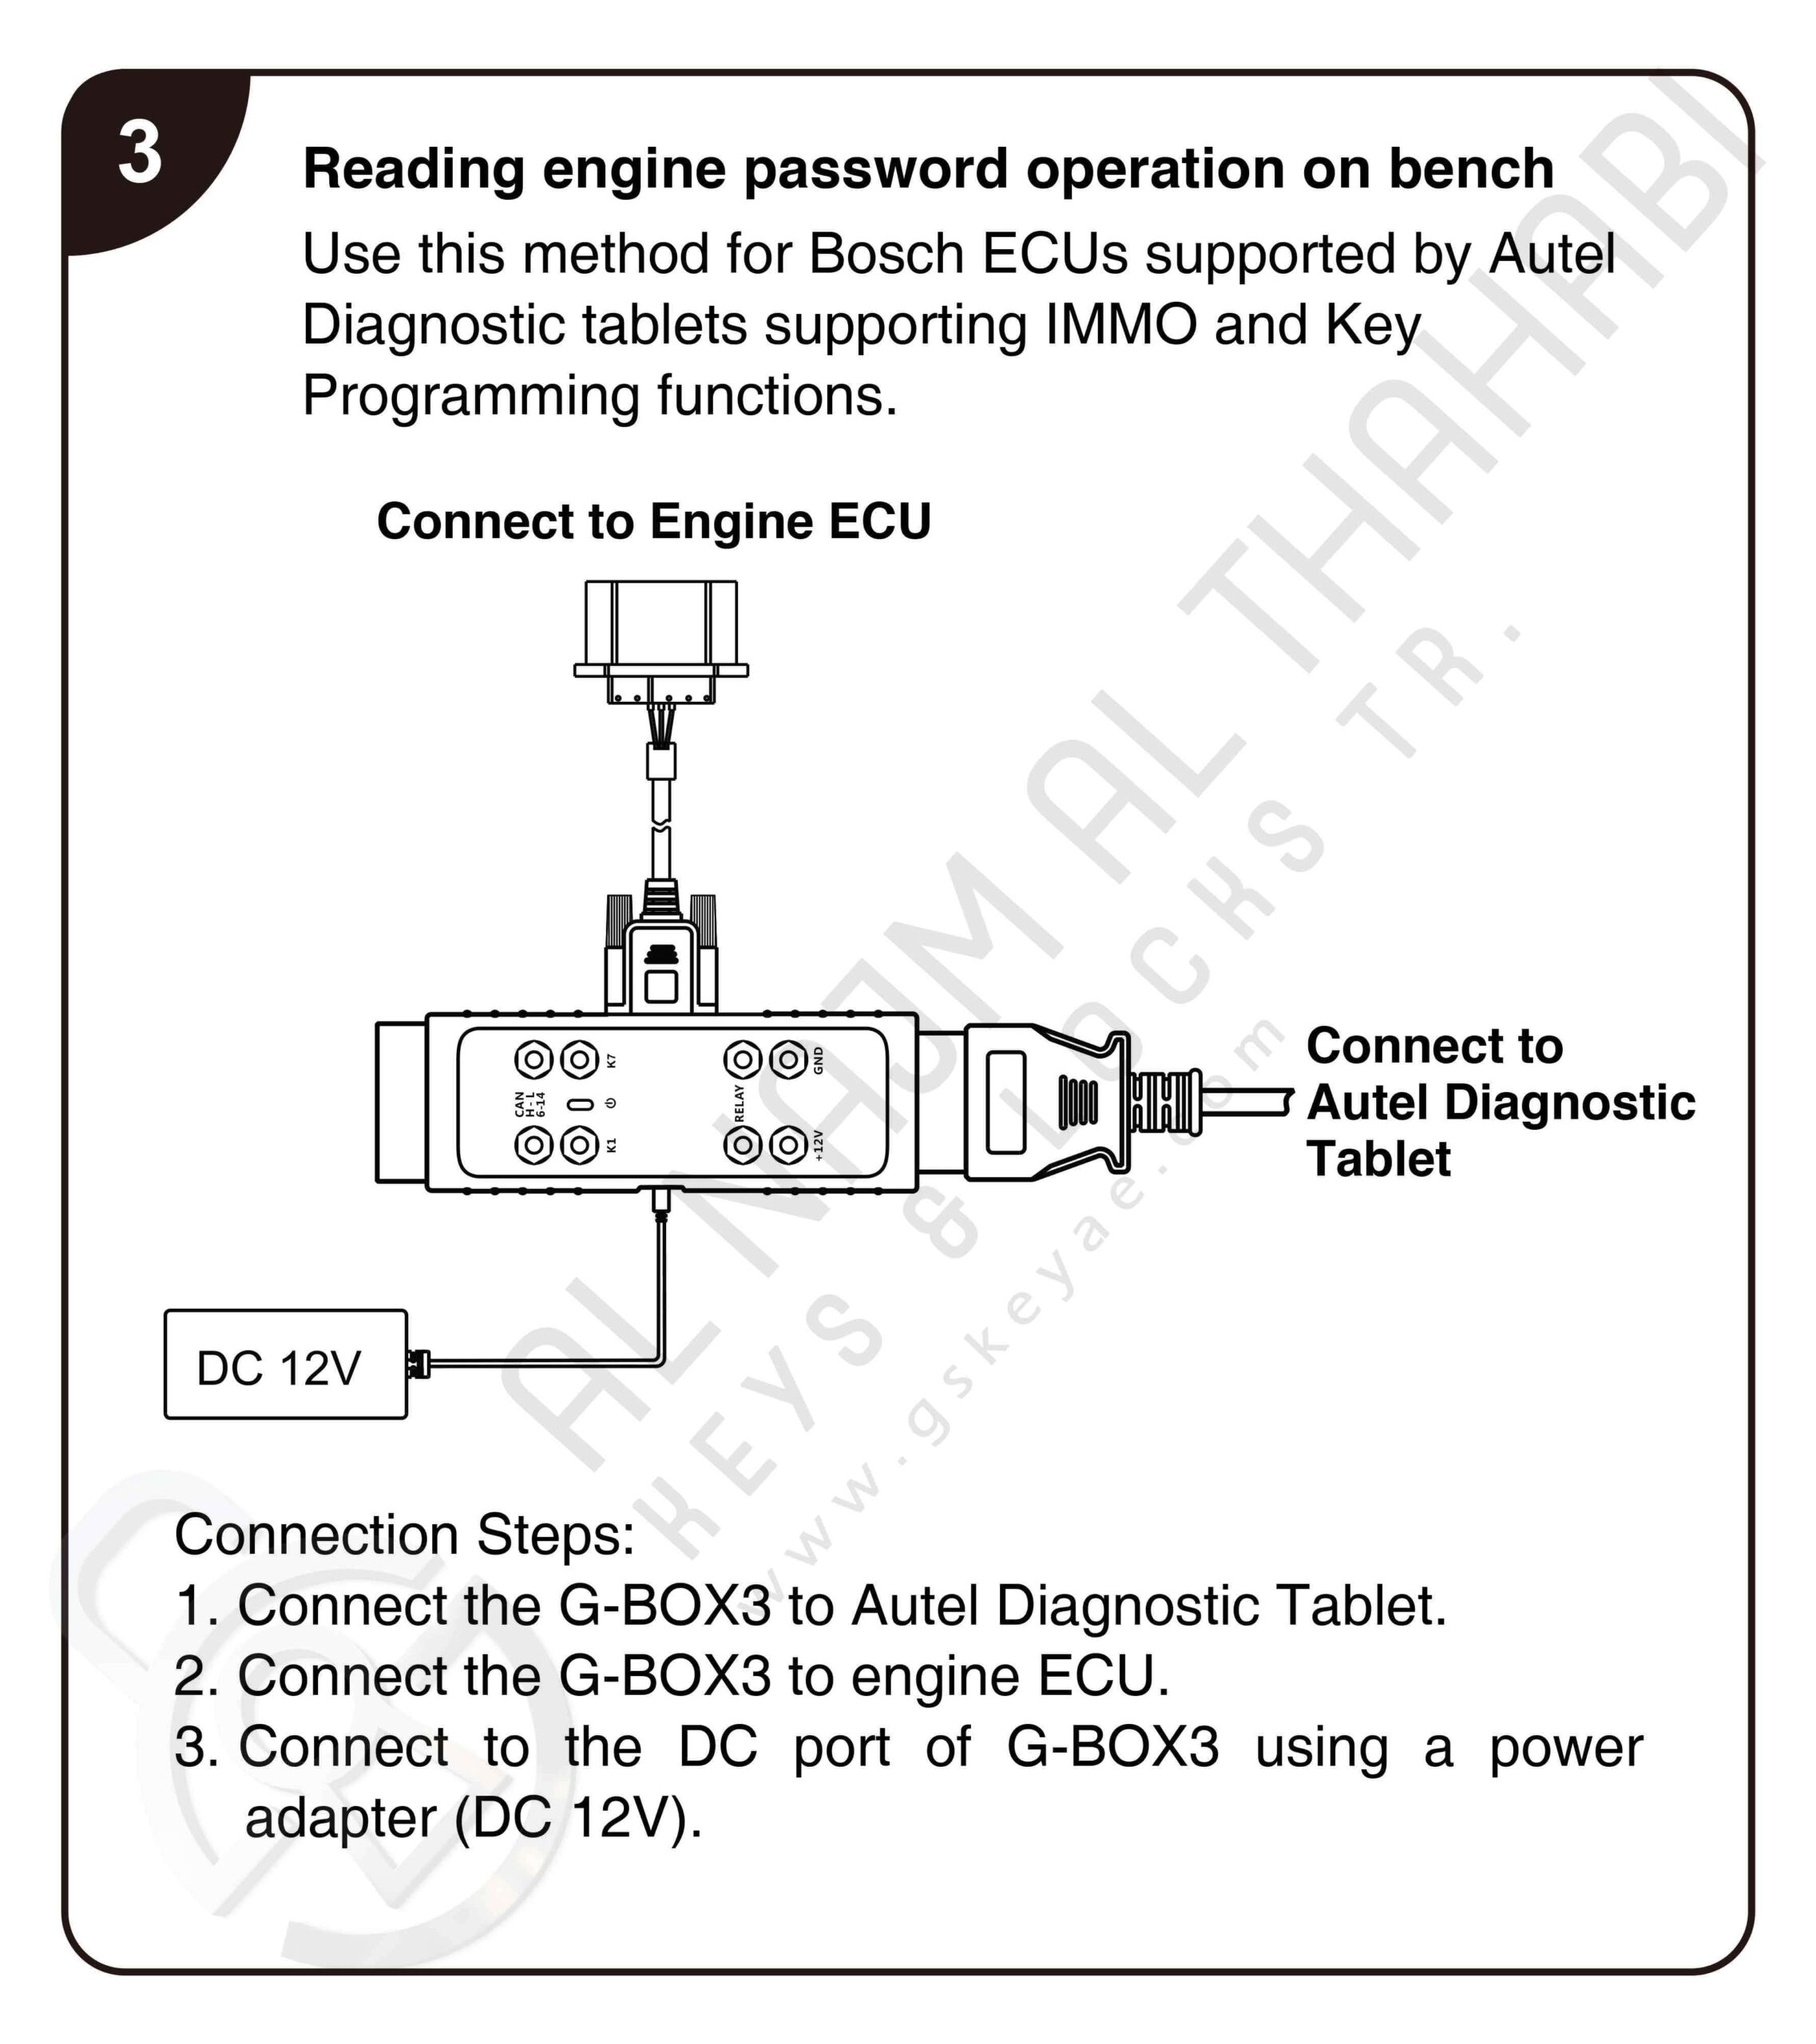 Reading engine password operation on bench